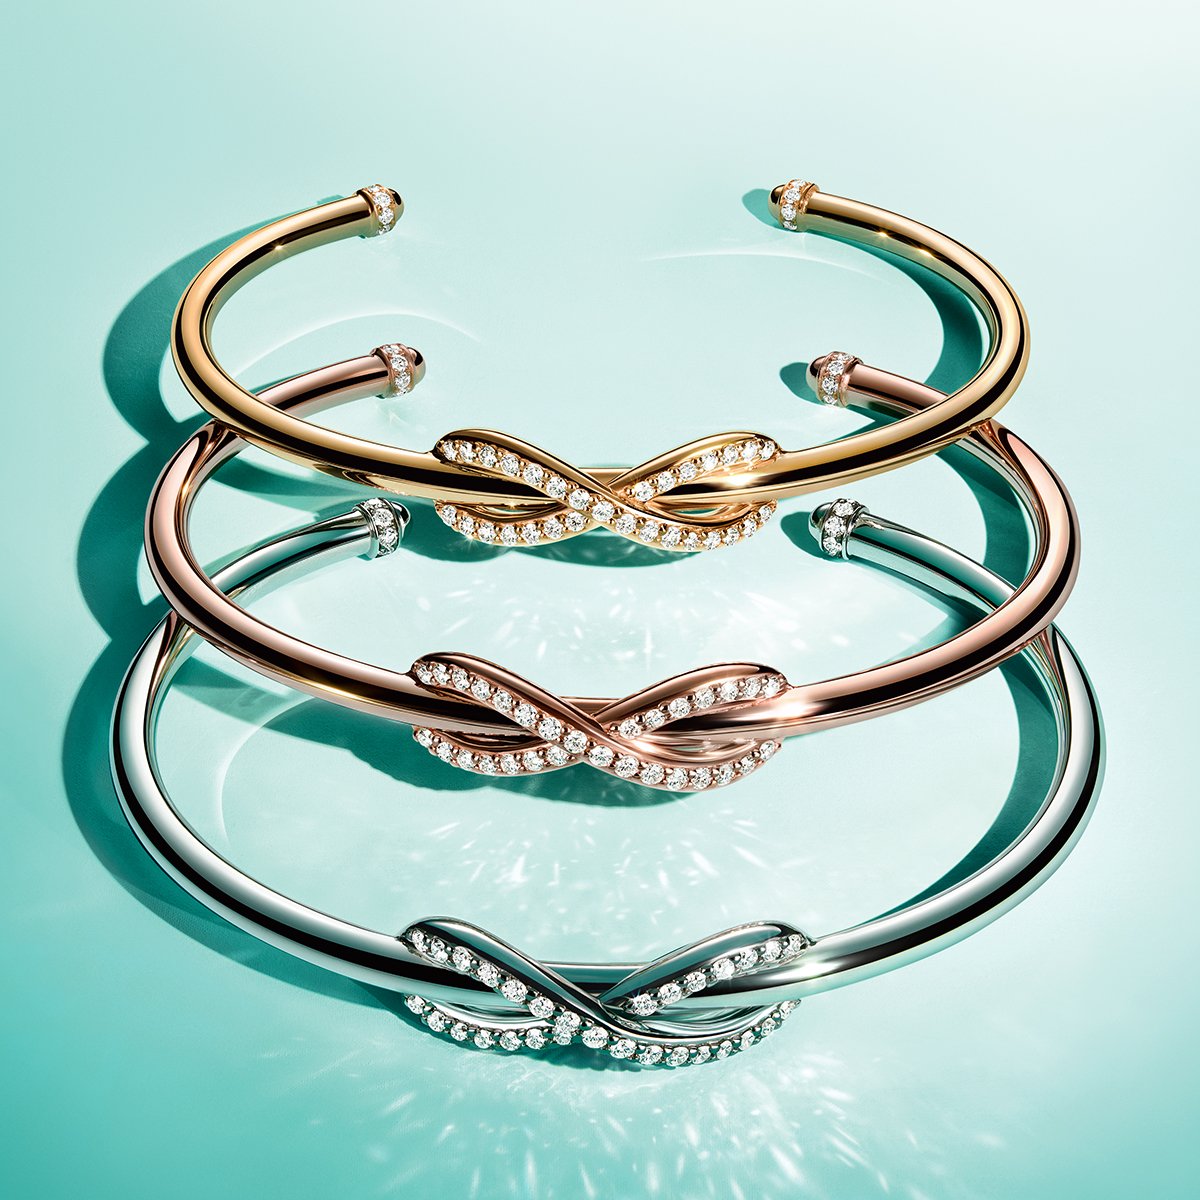 Tiffany & Co. These. 